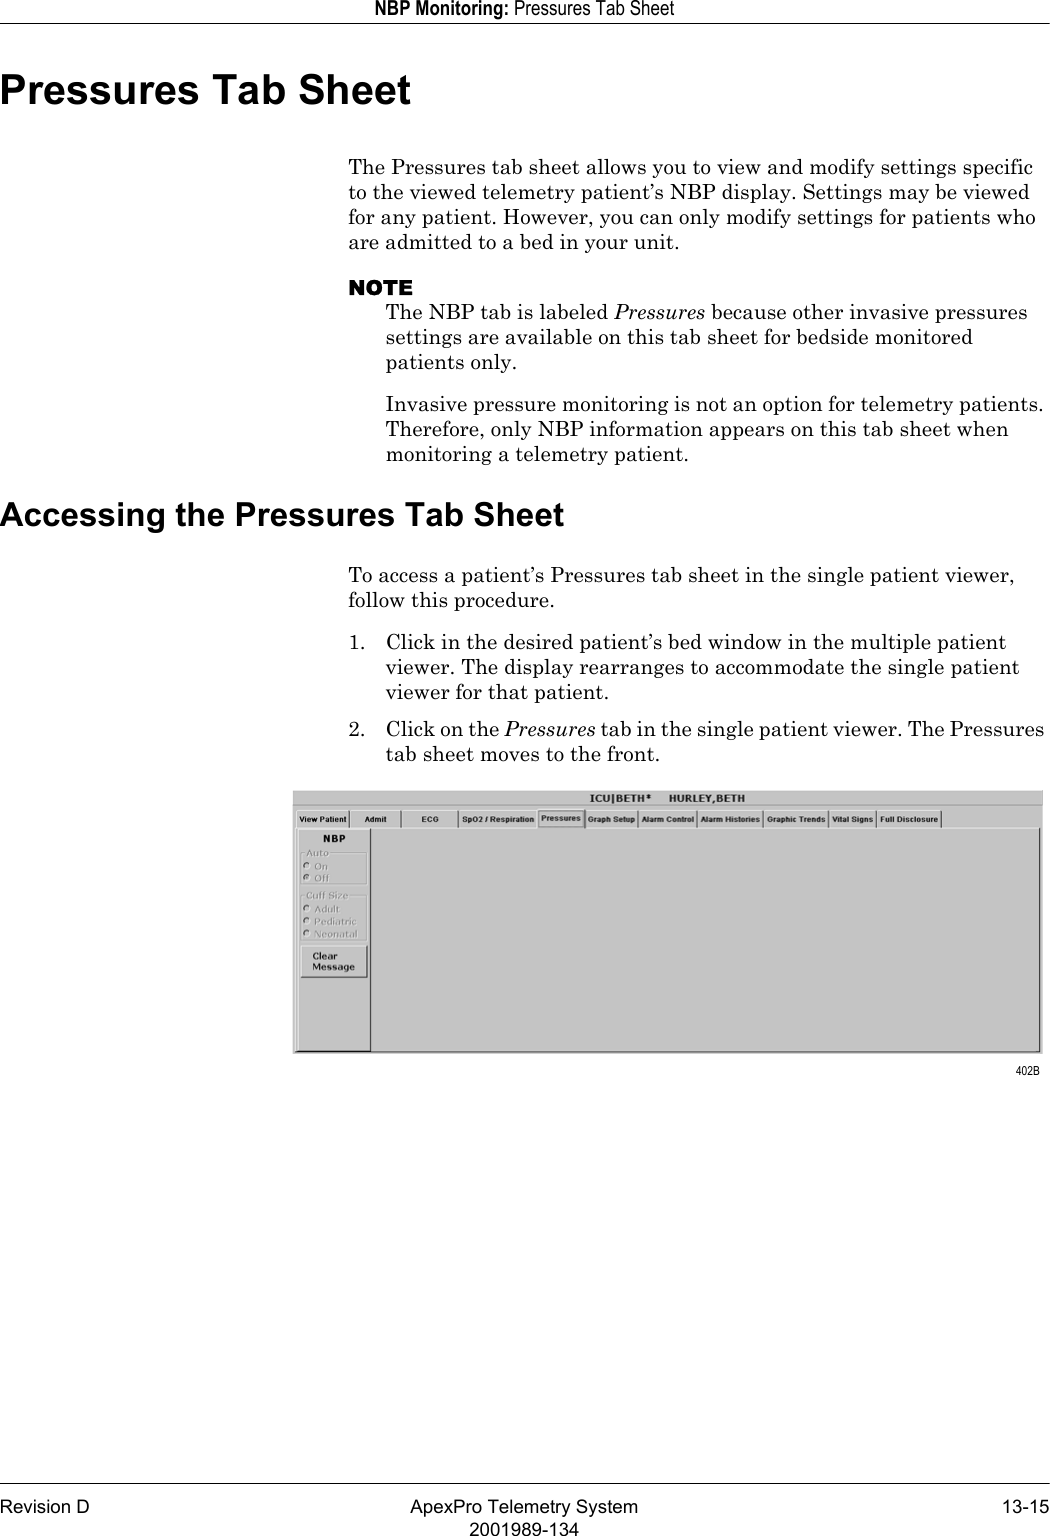 Revision D ApexPro Telemetry System 13-152001989-134NBP Monitoring: Pressures Tab SheetPressures Tab SheetThe Pressures tab sheet allows you to view and modify settings specific to the viewed telemetry patient’s NBP display. Settings may be viewed for any patient. However, you can only modify settings for patients who are admitted to a bed in your unit.NOTEThe NBP tab is labeled Pressures because other invasive pressures settings are available on this tab sheet for bedside monitored patients only.Invasive pressure monitoring is not an option for telemetry patients. Therefore, only NBP information appears on this tab sheet when monitoring a telemetry patient.Accessing the Pressures Tab SheetTo access a patient’s Pressures tab sheet in the single patient viewer, follow this procedure.1. Click in the desired patient’s bed window in the multiple patient viewer. The display rearranges to accommodate the single patient viewer for that patient.2. Click on the Pressures tab in the single patient viewer. The Pressures tab sheet moves to the front. 402B